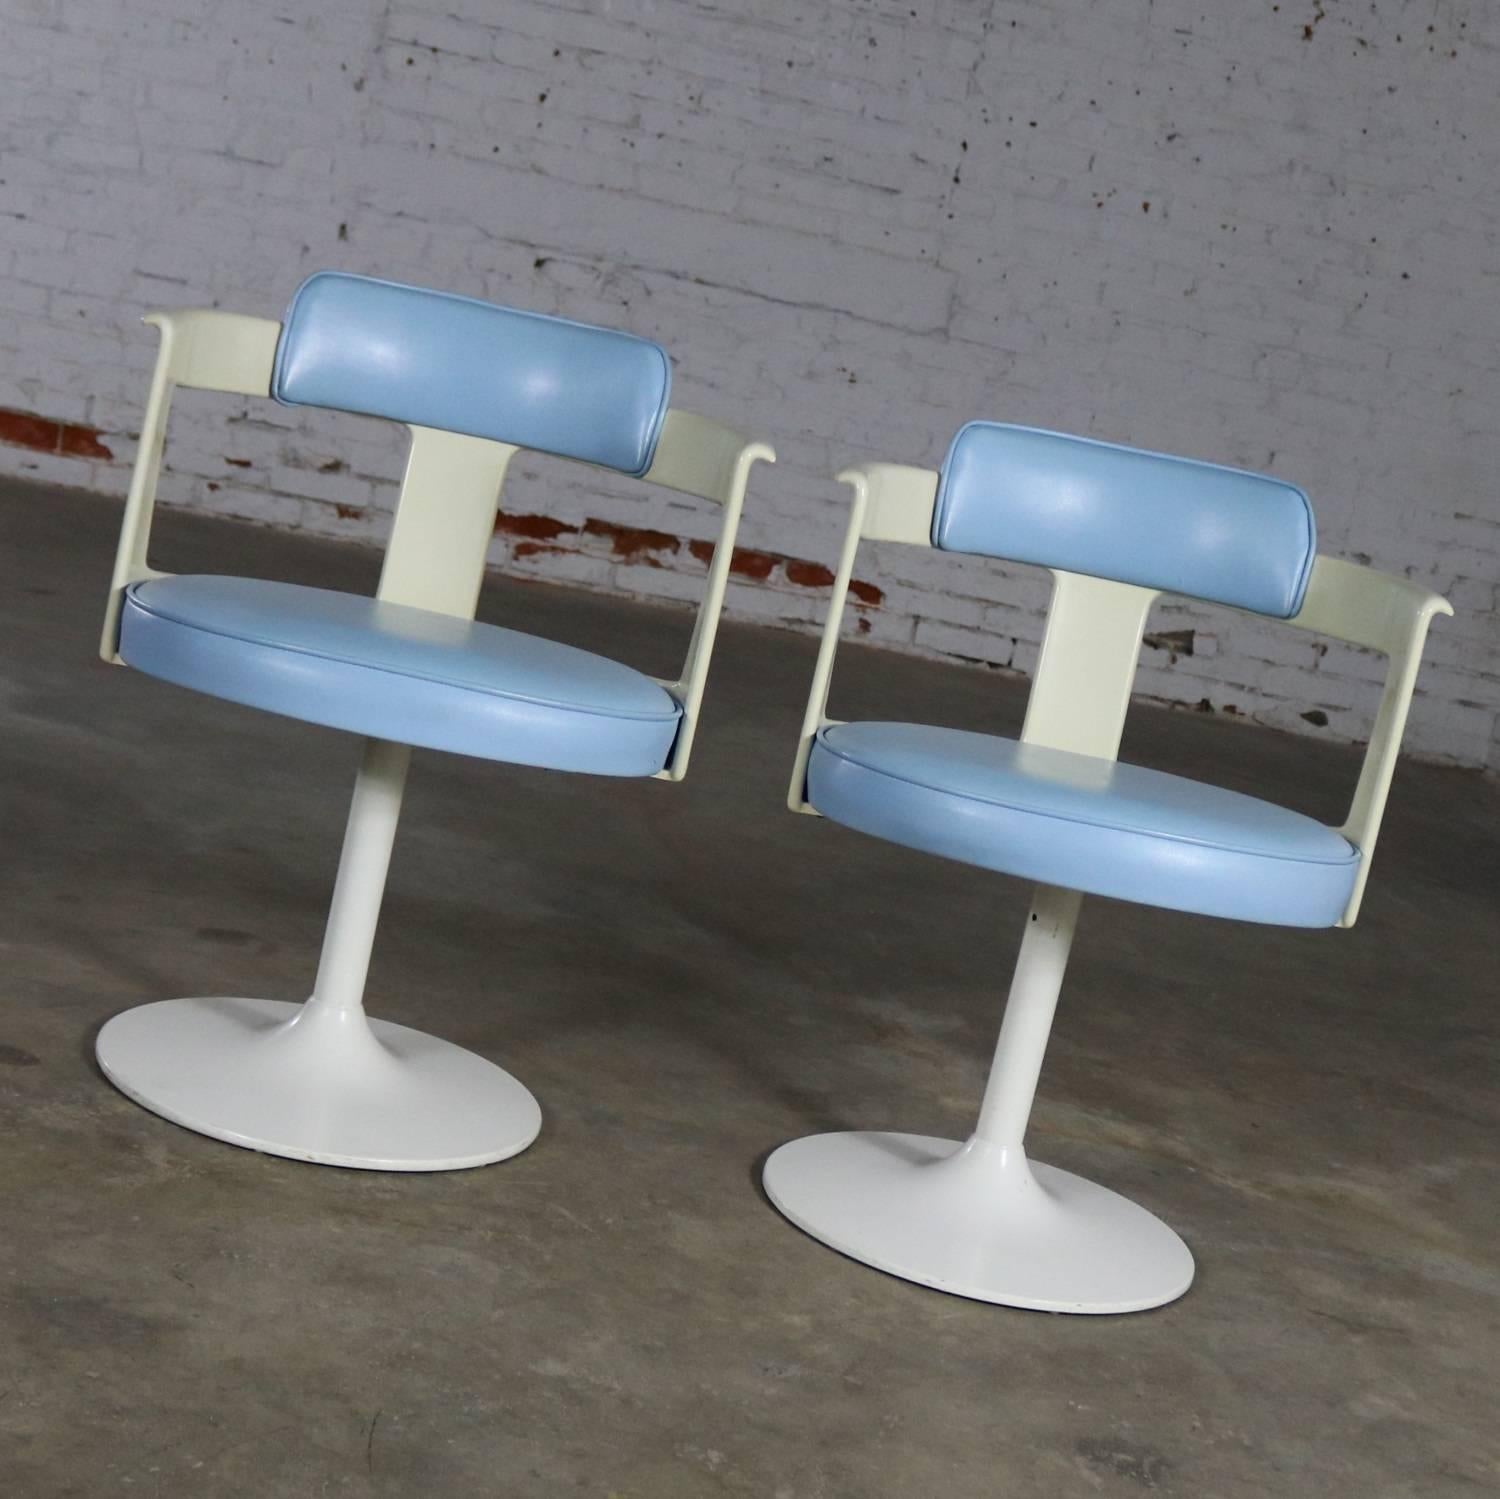 Awesome pair of Mid-Century Modern tulip style swivel chairs by Daystrom Furniture in their original baby blue vinyl upholstery white plastic arms and frame and white painted metal bases. They are in wonderful vintage condition. There is a slight